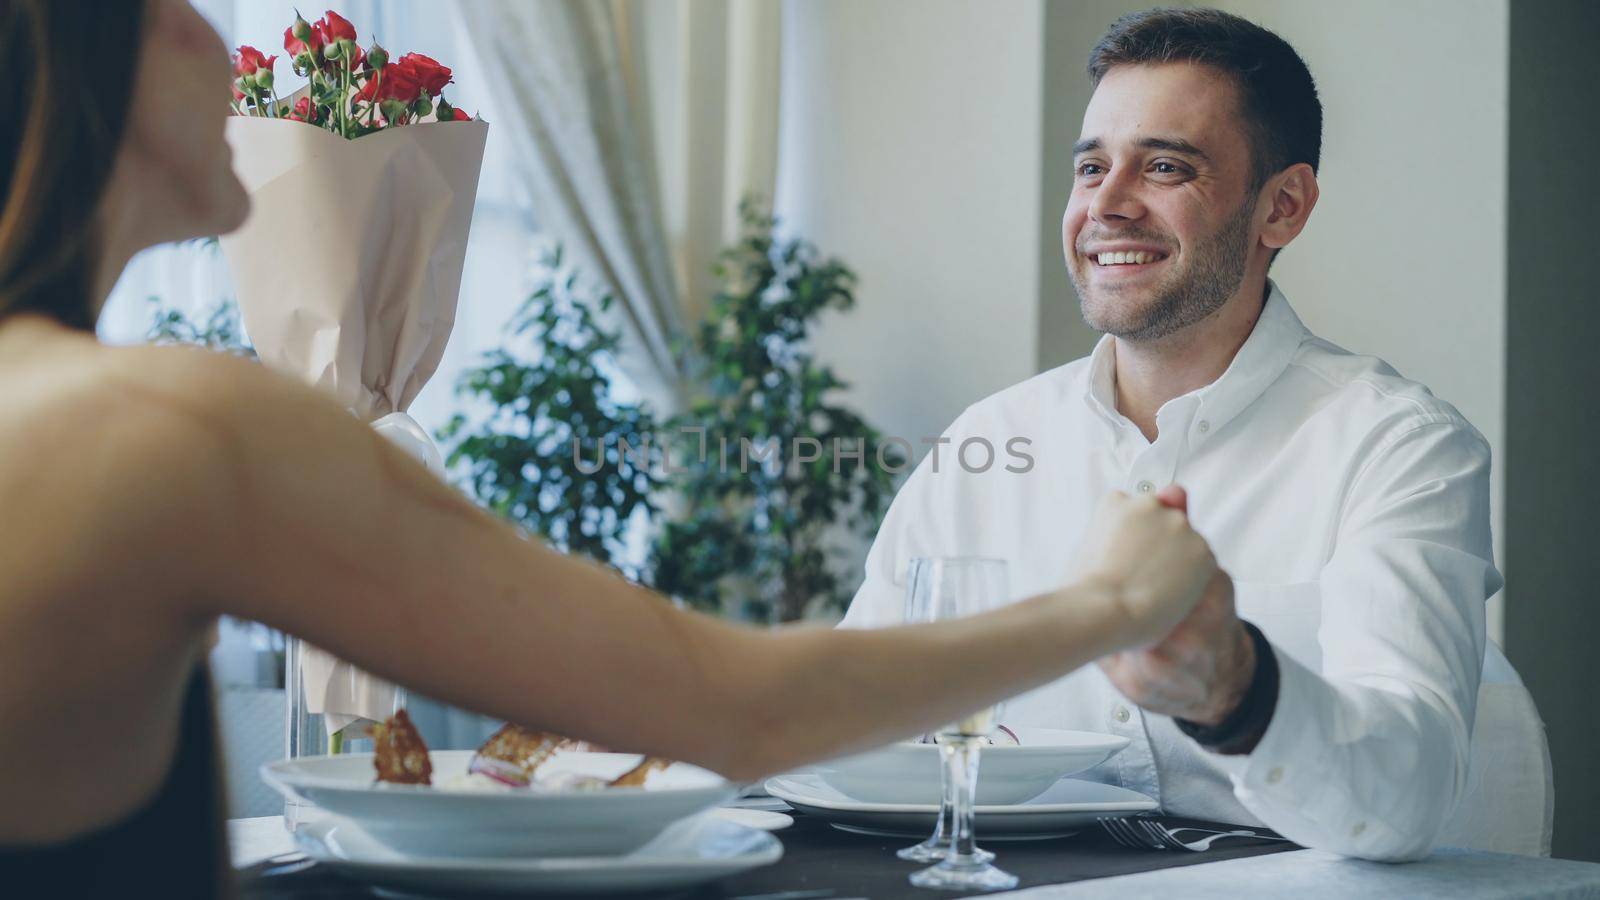 Young handsome man is talking to his girlfriend on date in fancy restaurant, drinking champagne and taking her hand with love and care. Romance and relationships concept.